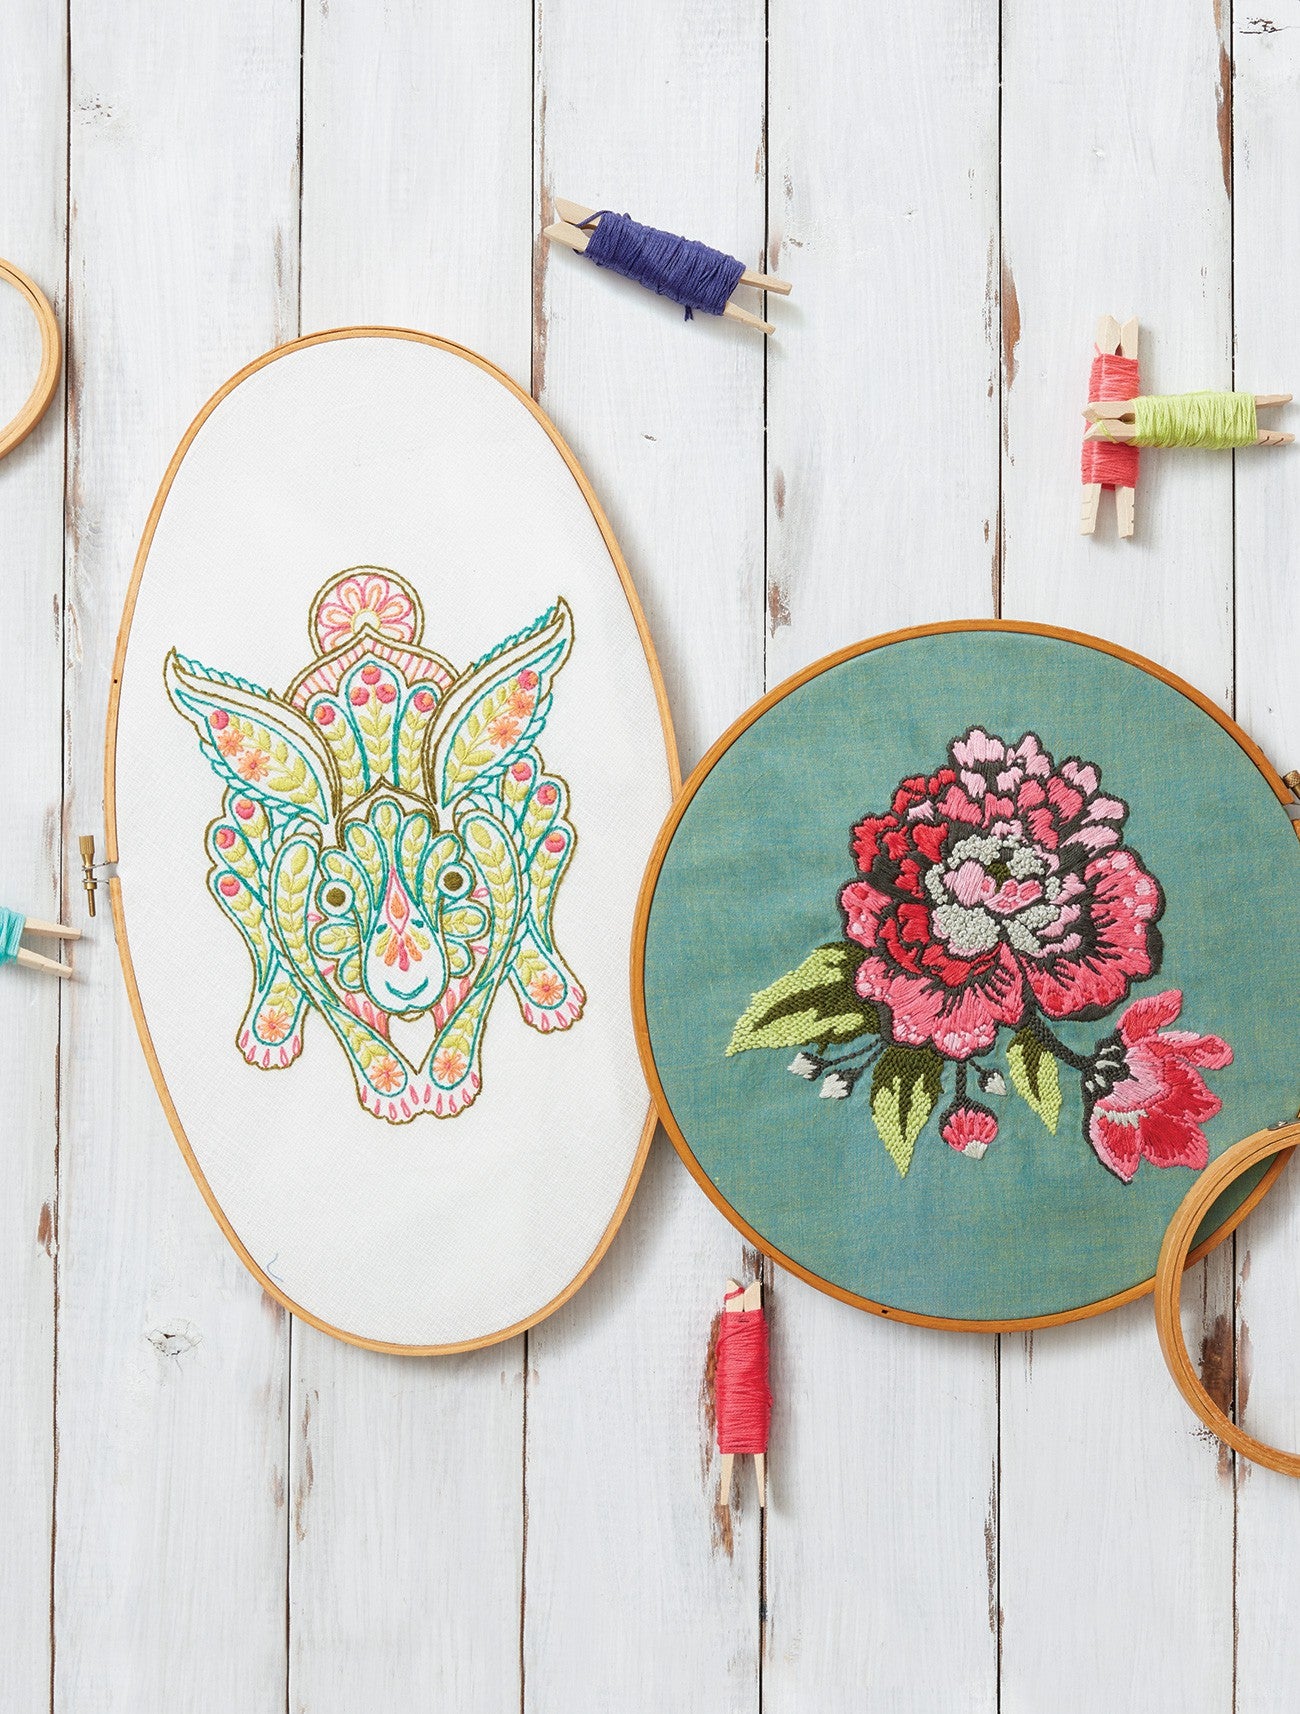 Coloring with Thread by Tula Pink